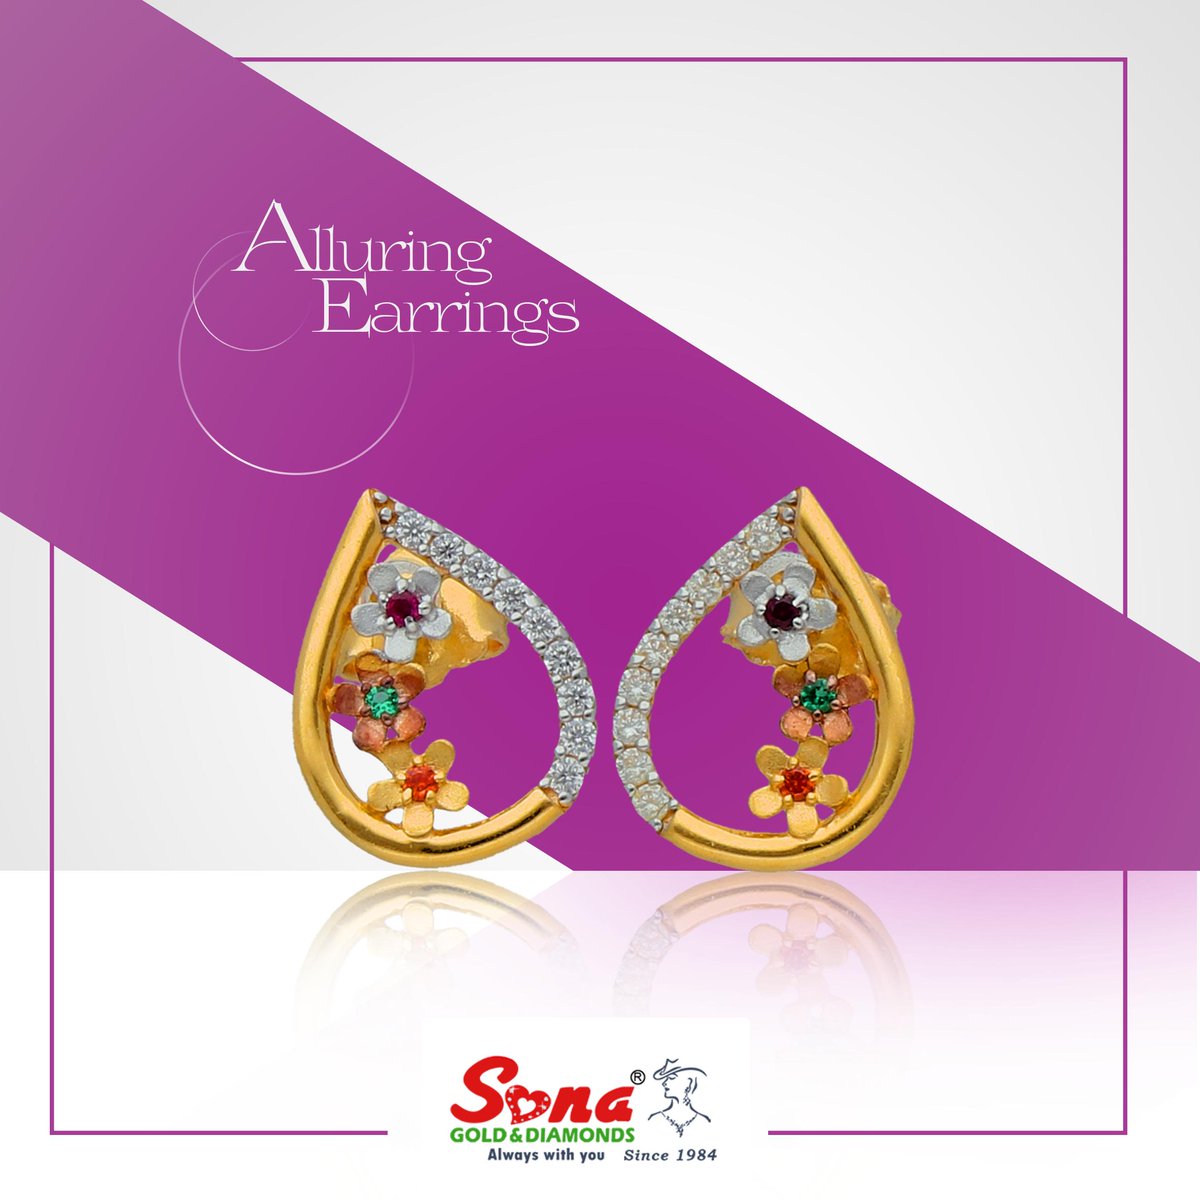 Pair it with your traditional or modern attire, and it will surely elevate your look. Buy stunning pieces of jewellery from Sona Gold & Diamonds.

#SonaGoldandDiamonds #JewelleryCollections #earrings #partyearrings  #beautifulearrings  #weddingearrings